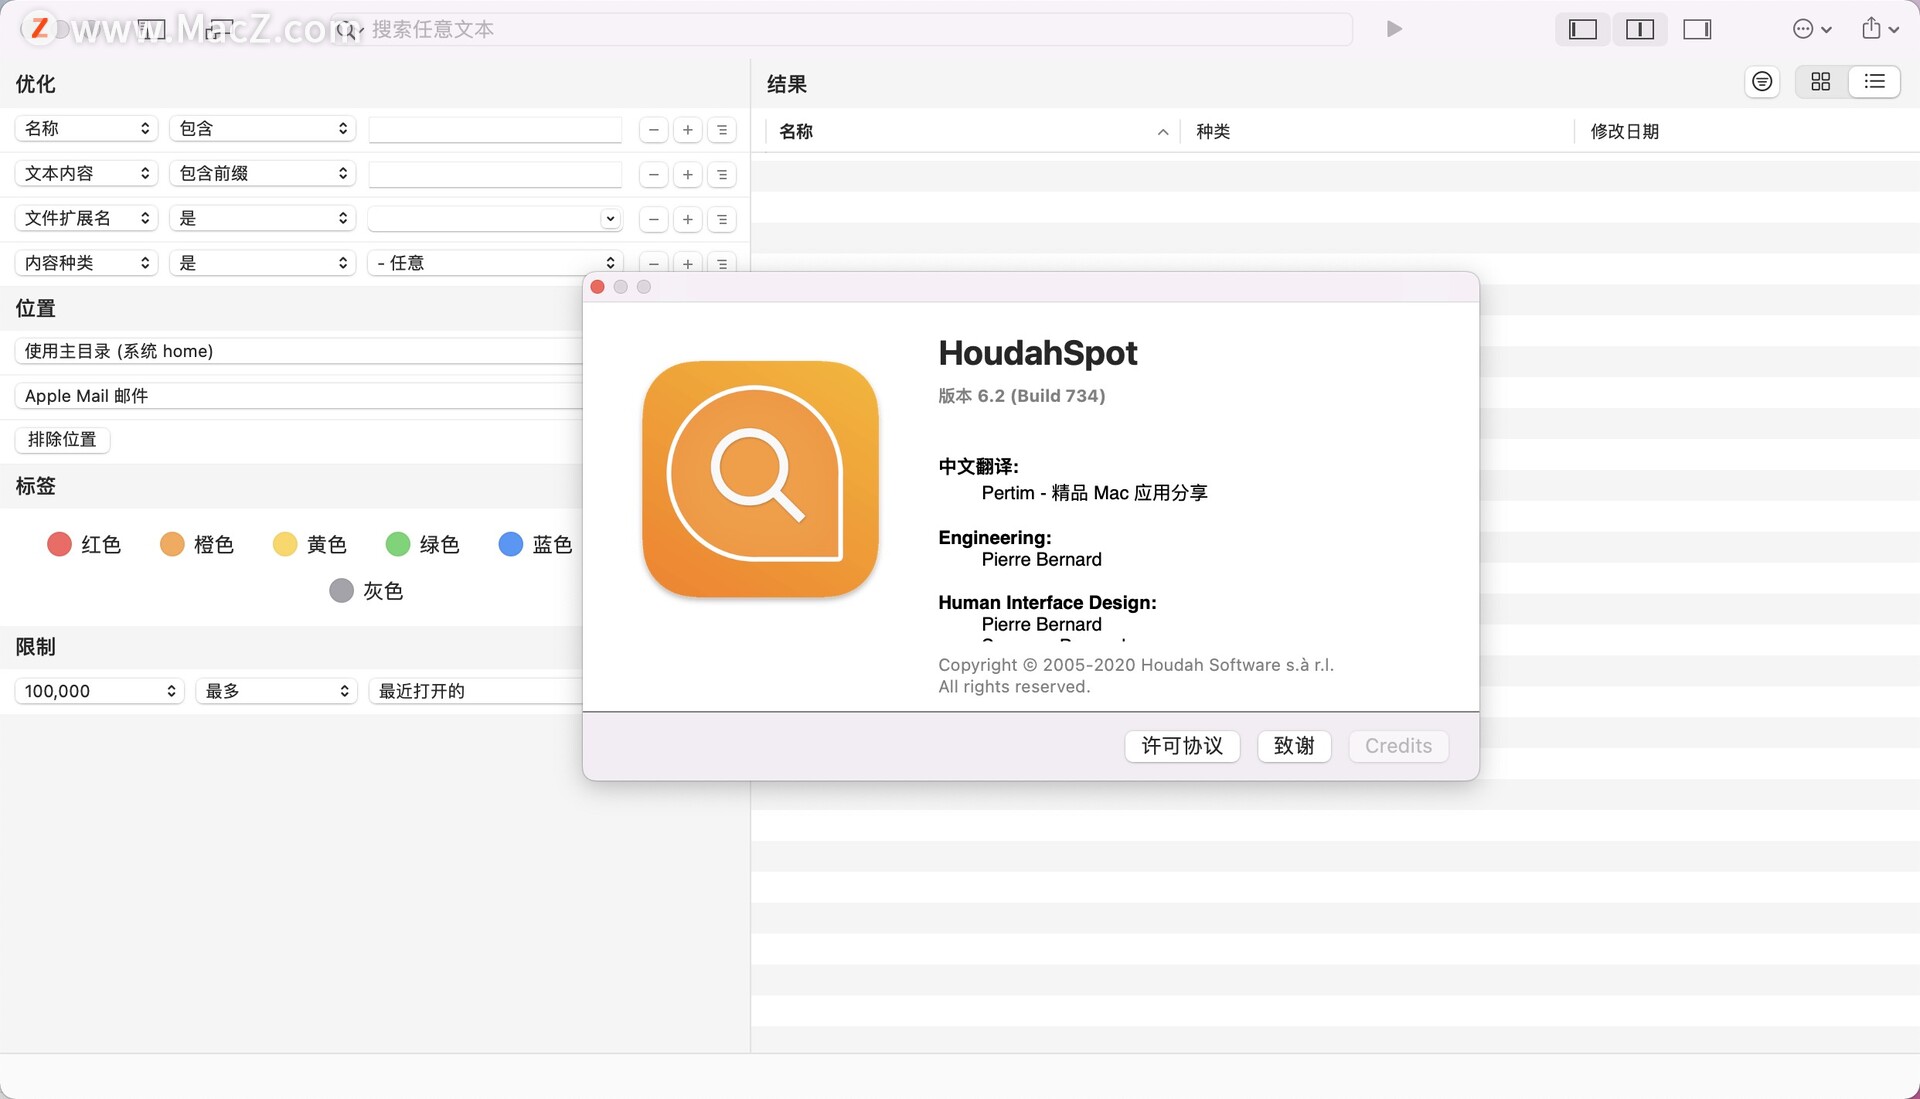 download the last version for apple HoudahSpot